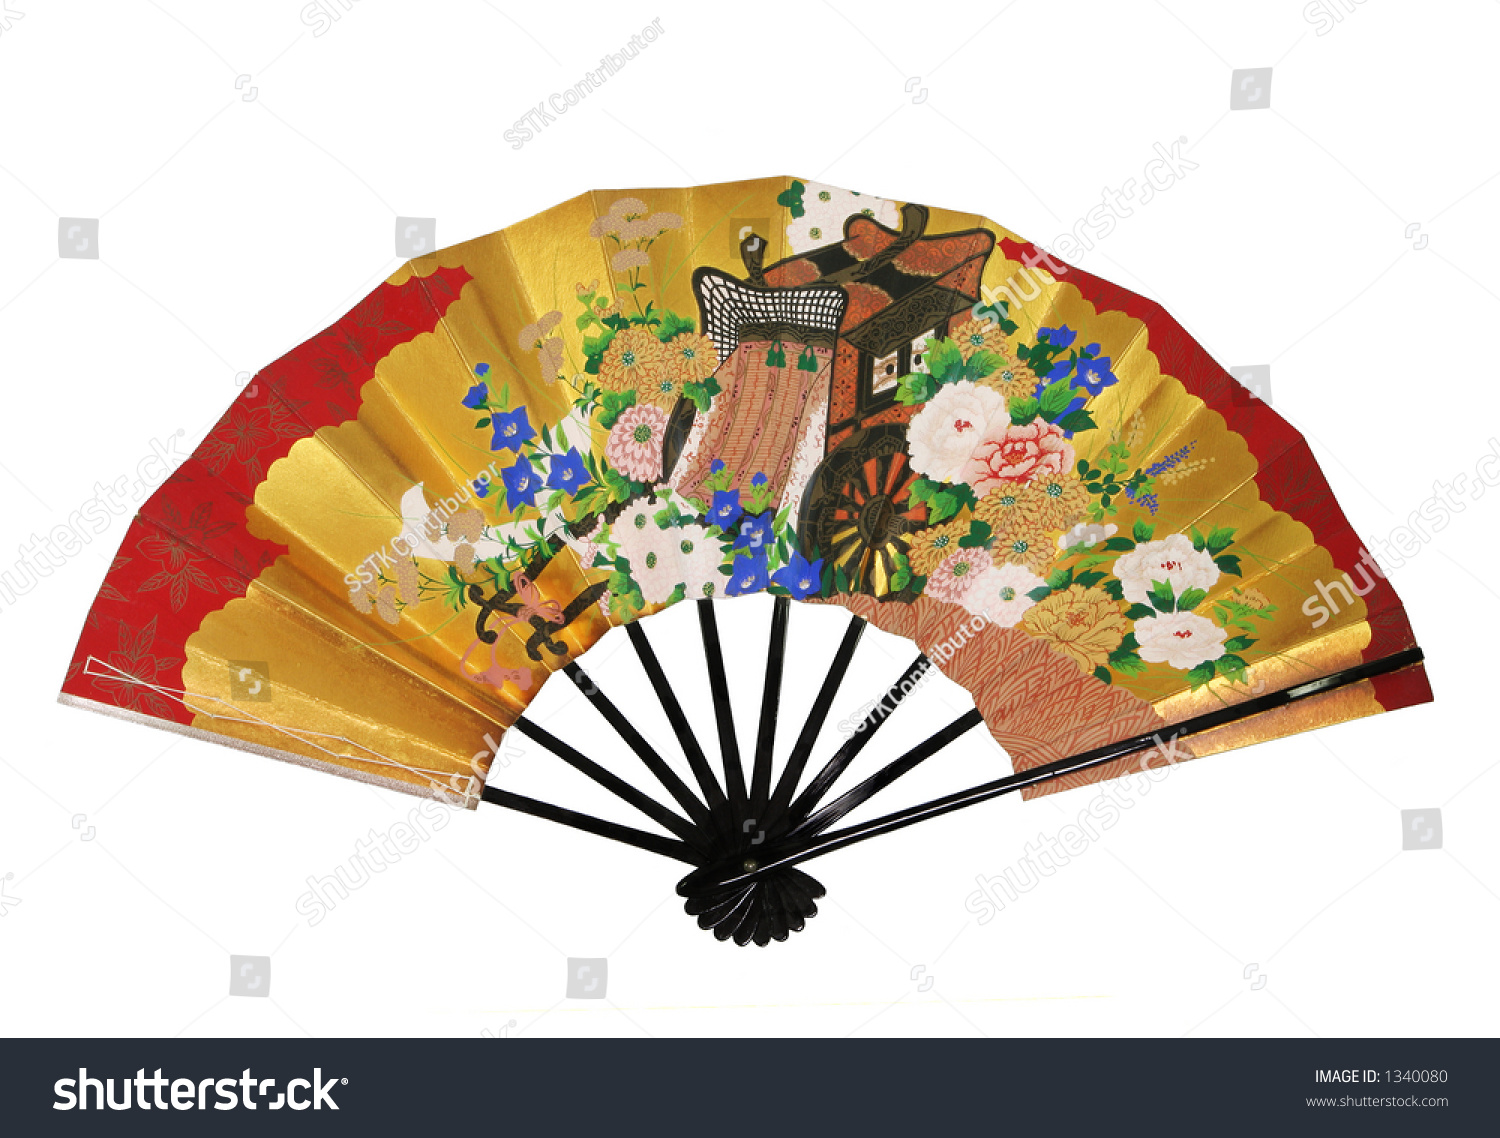 Japanese folding fan made of paper and bamboo. #1340080